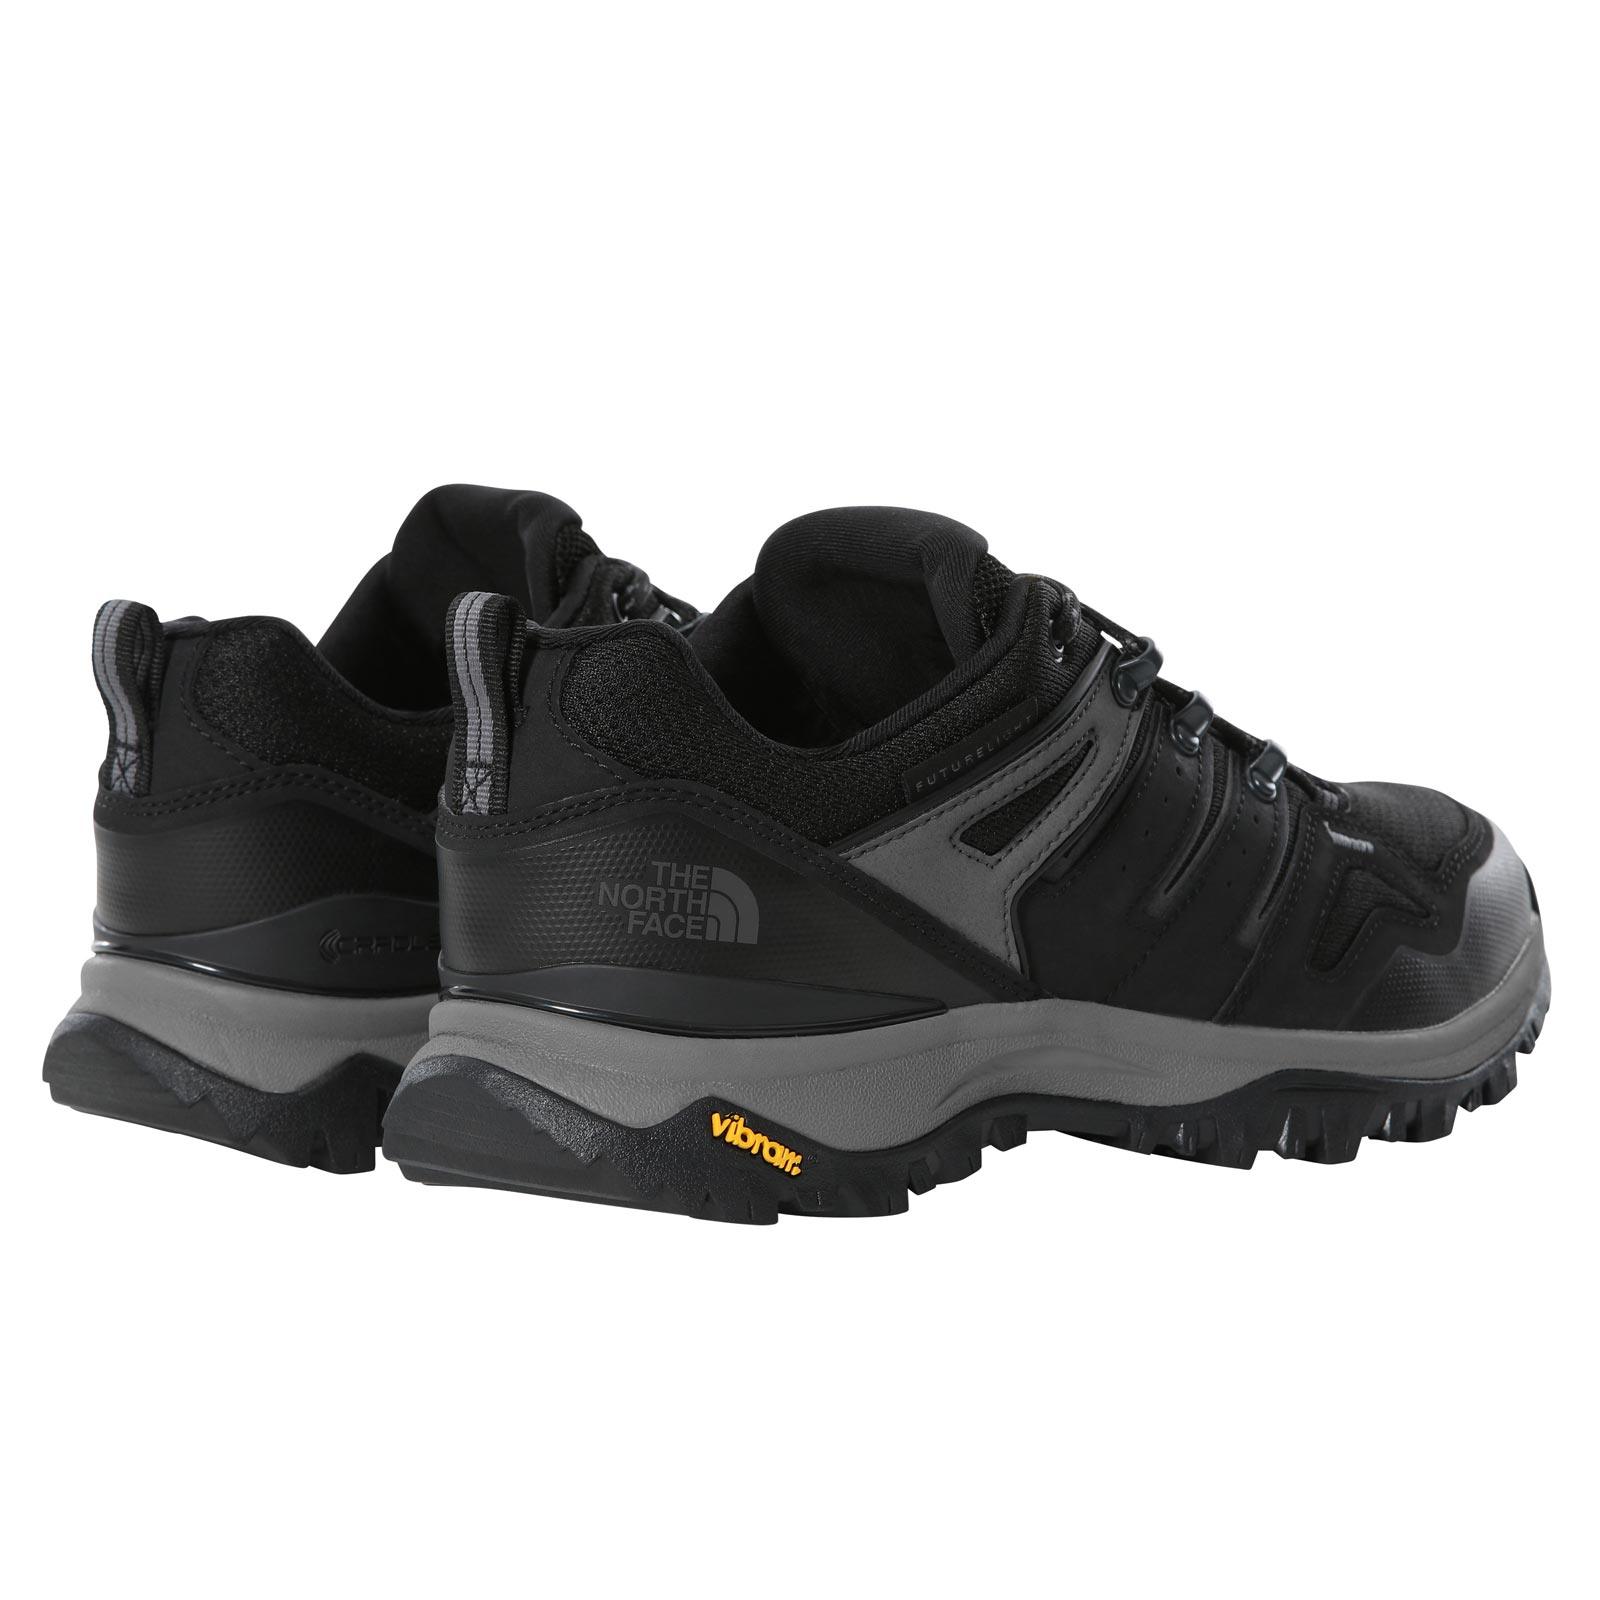 THE NORTH FACE HEDGEHOG FUTURELIGHT MENS HIKING SHOES